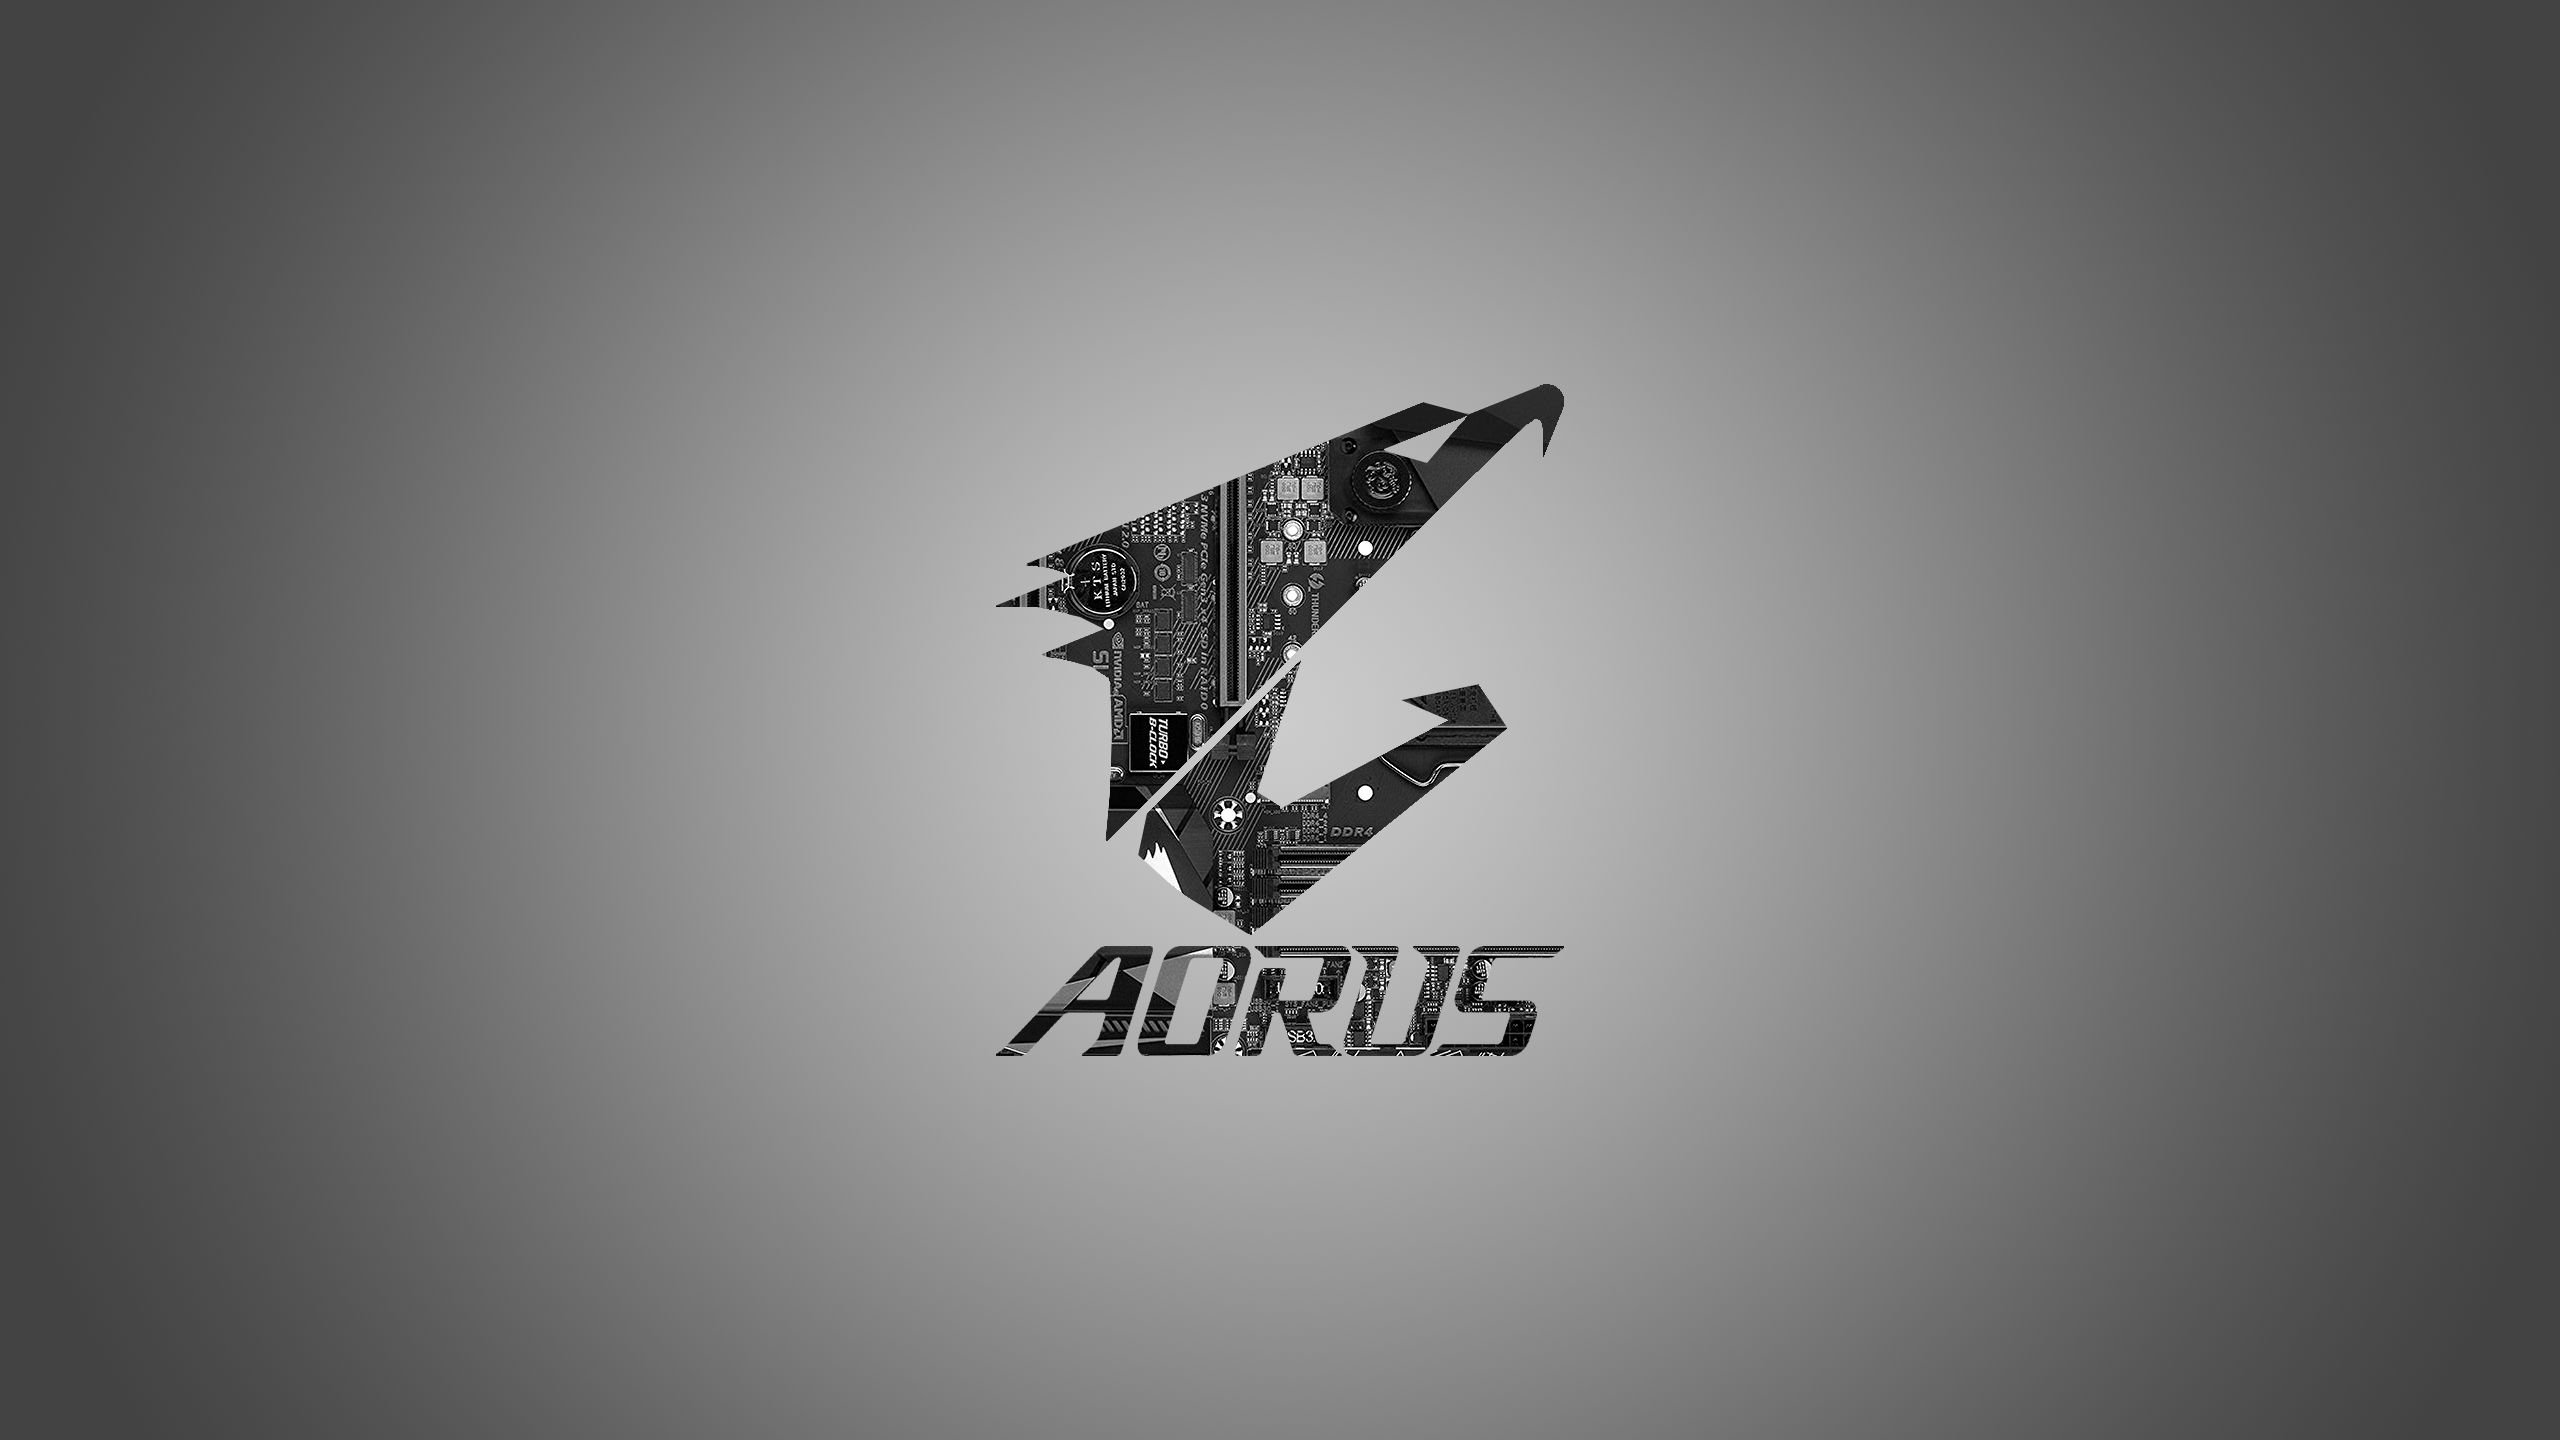 Gigabyte Aorus wallpapers for desktop, download free Gigabyte Aorus  pictures and backgrounds for PC 